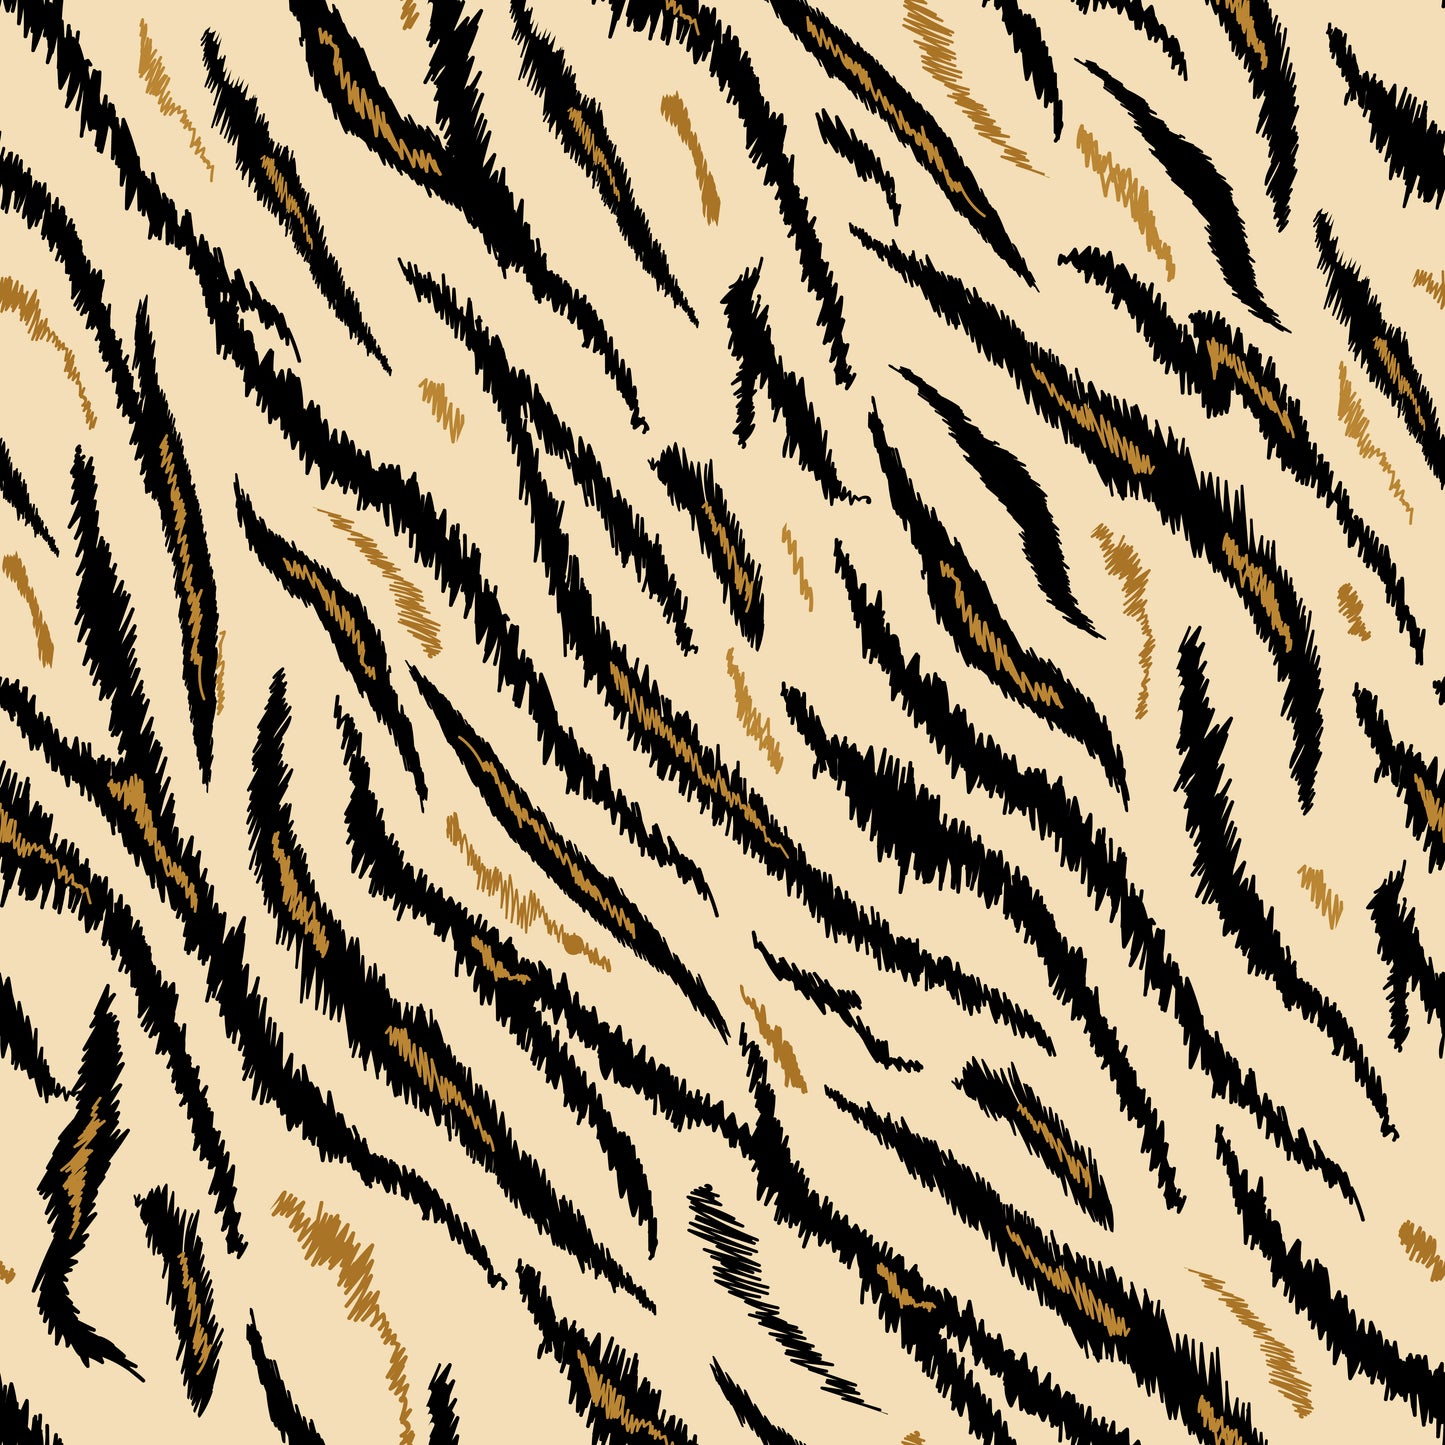 tiger texture seamless animal pattern striped fabric background tiger skin fashion abstract design